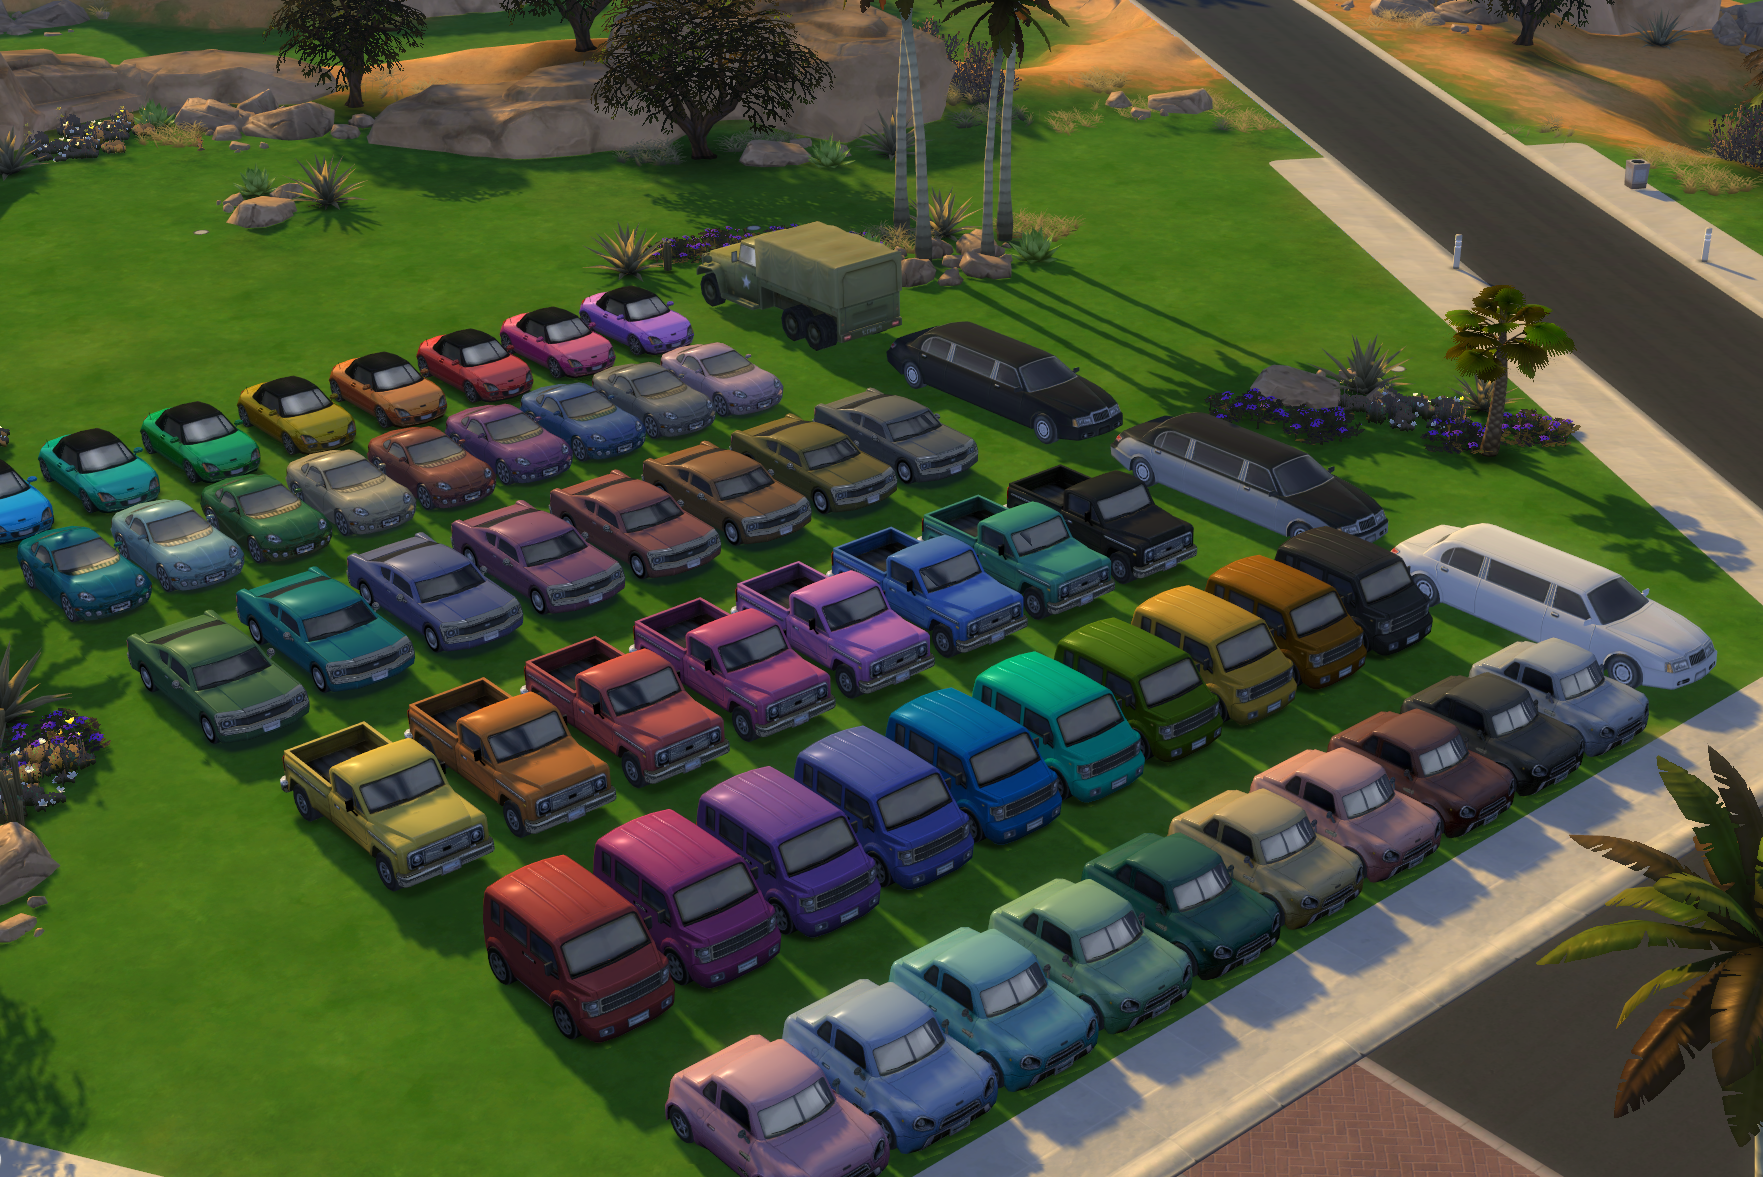 Mod The Sims - Buyable Cars for Mapless Travel